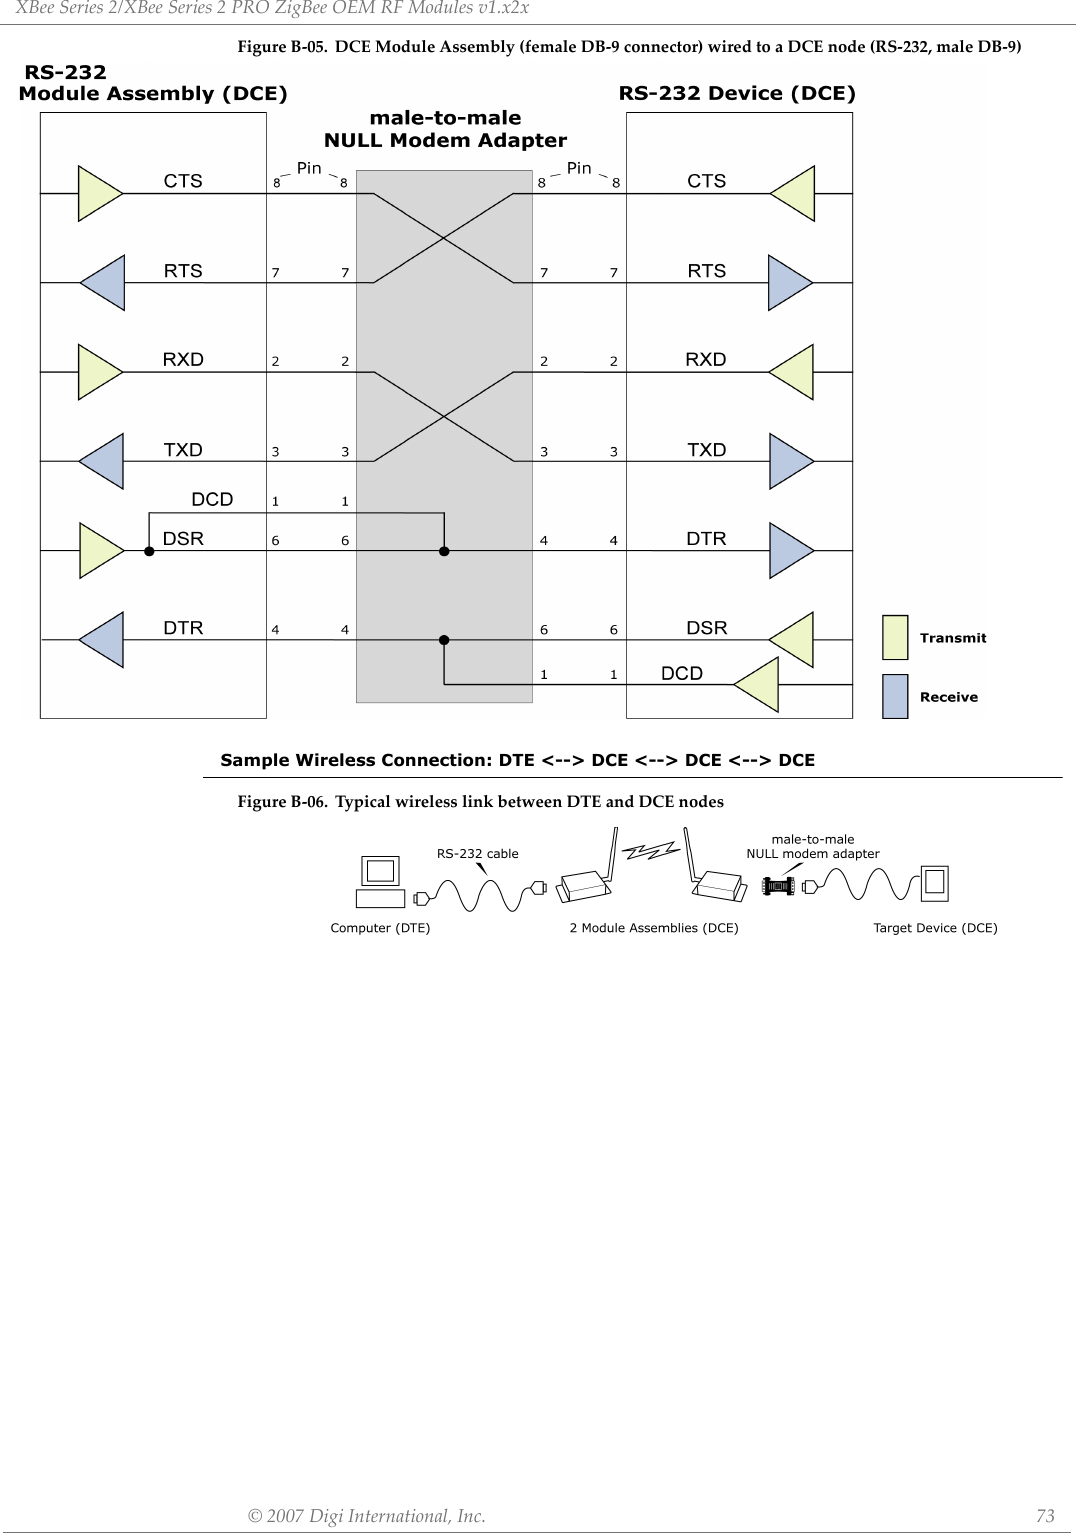 XBeeSeries2/XBeeSeries2PROZigBeeOEMRFModulesv1.x2x©2007DigiInternational,Inc. 73FigureB‐05. DCEModuleAssembly(femaleDB‐9connector)wiredtoaDCEnode(RS‐232,maleDB‐9) Sample Wireless Connection: DTE &lt;--&gt; DCE &lt;--&gt; DCE &lt;--&gt; DCEFigureB‐06. TypicalwirelesslinkbetweenDTEandDCEnodes